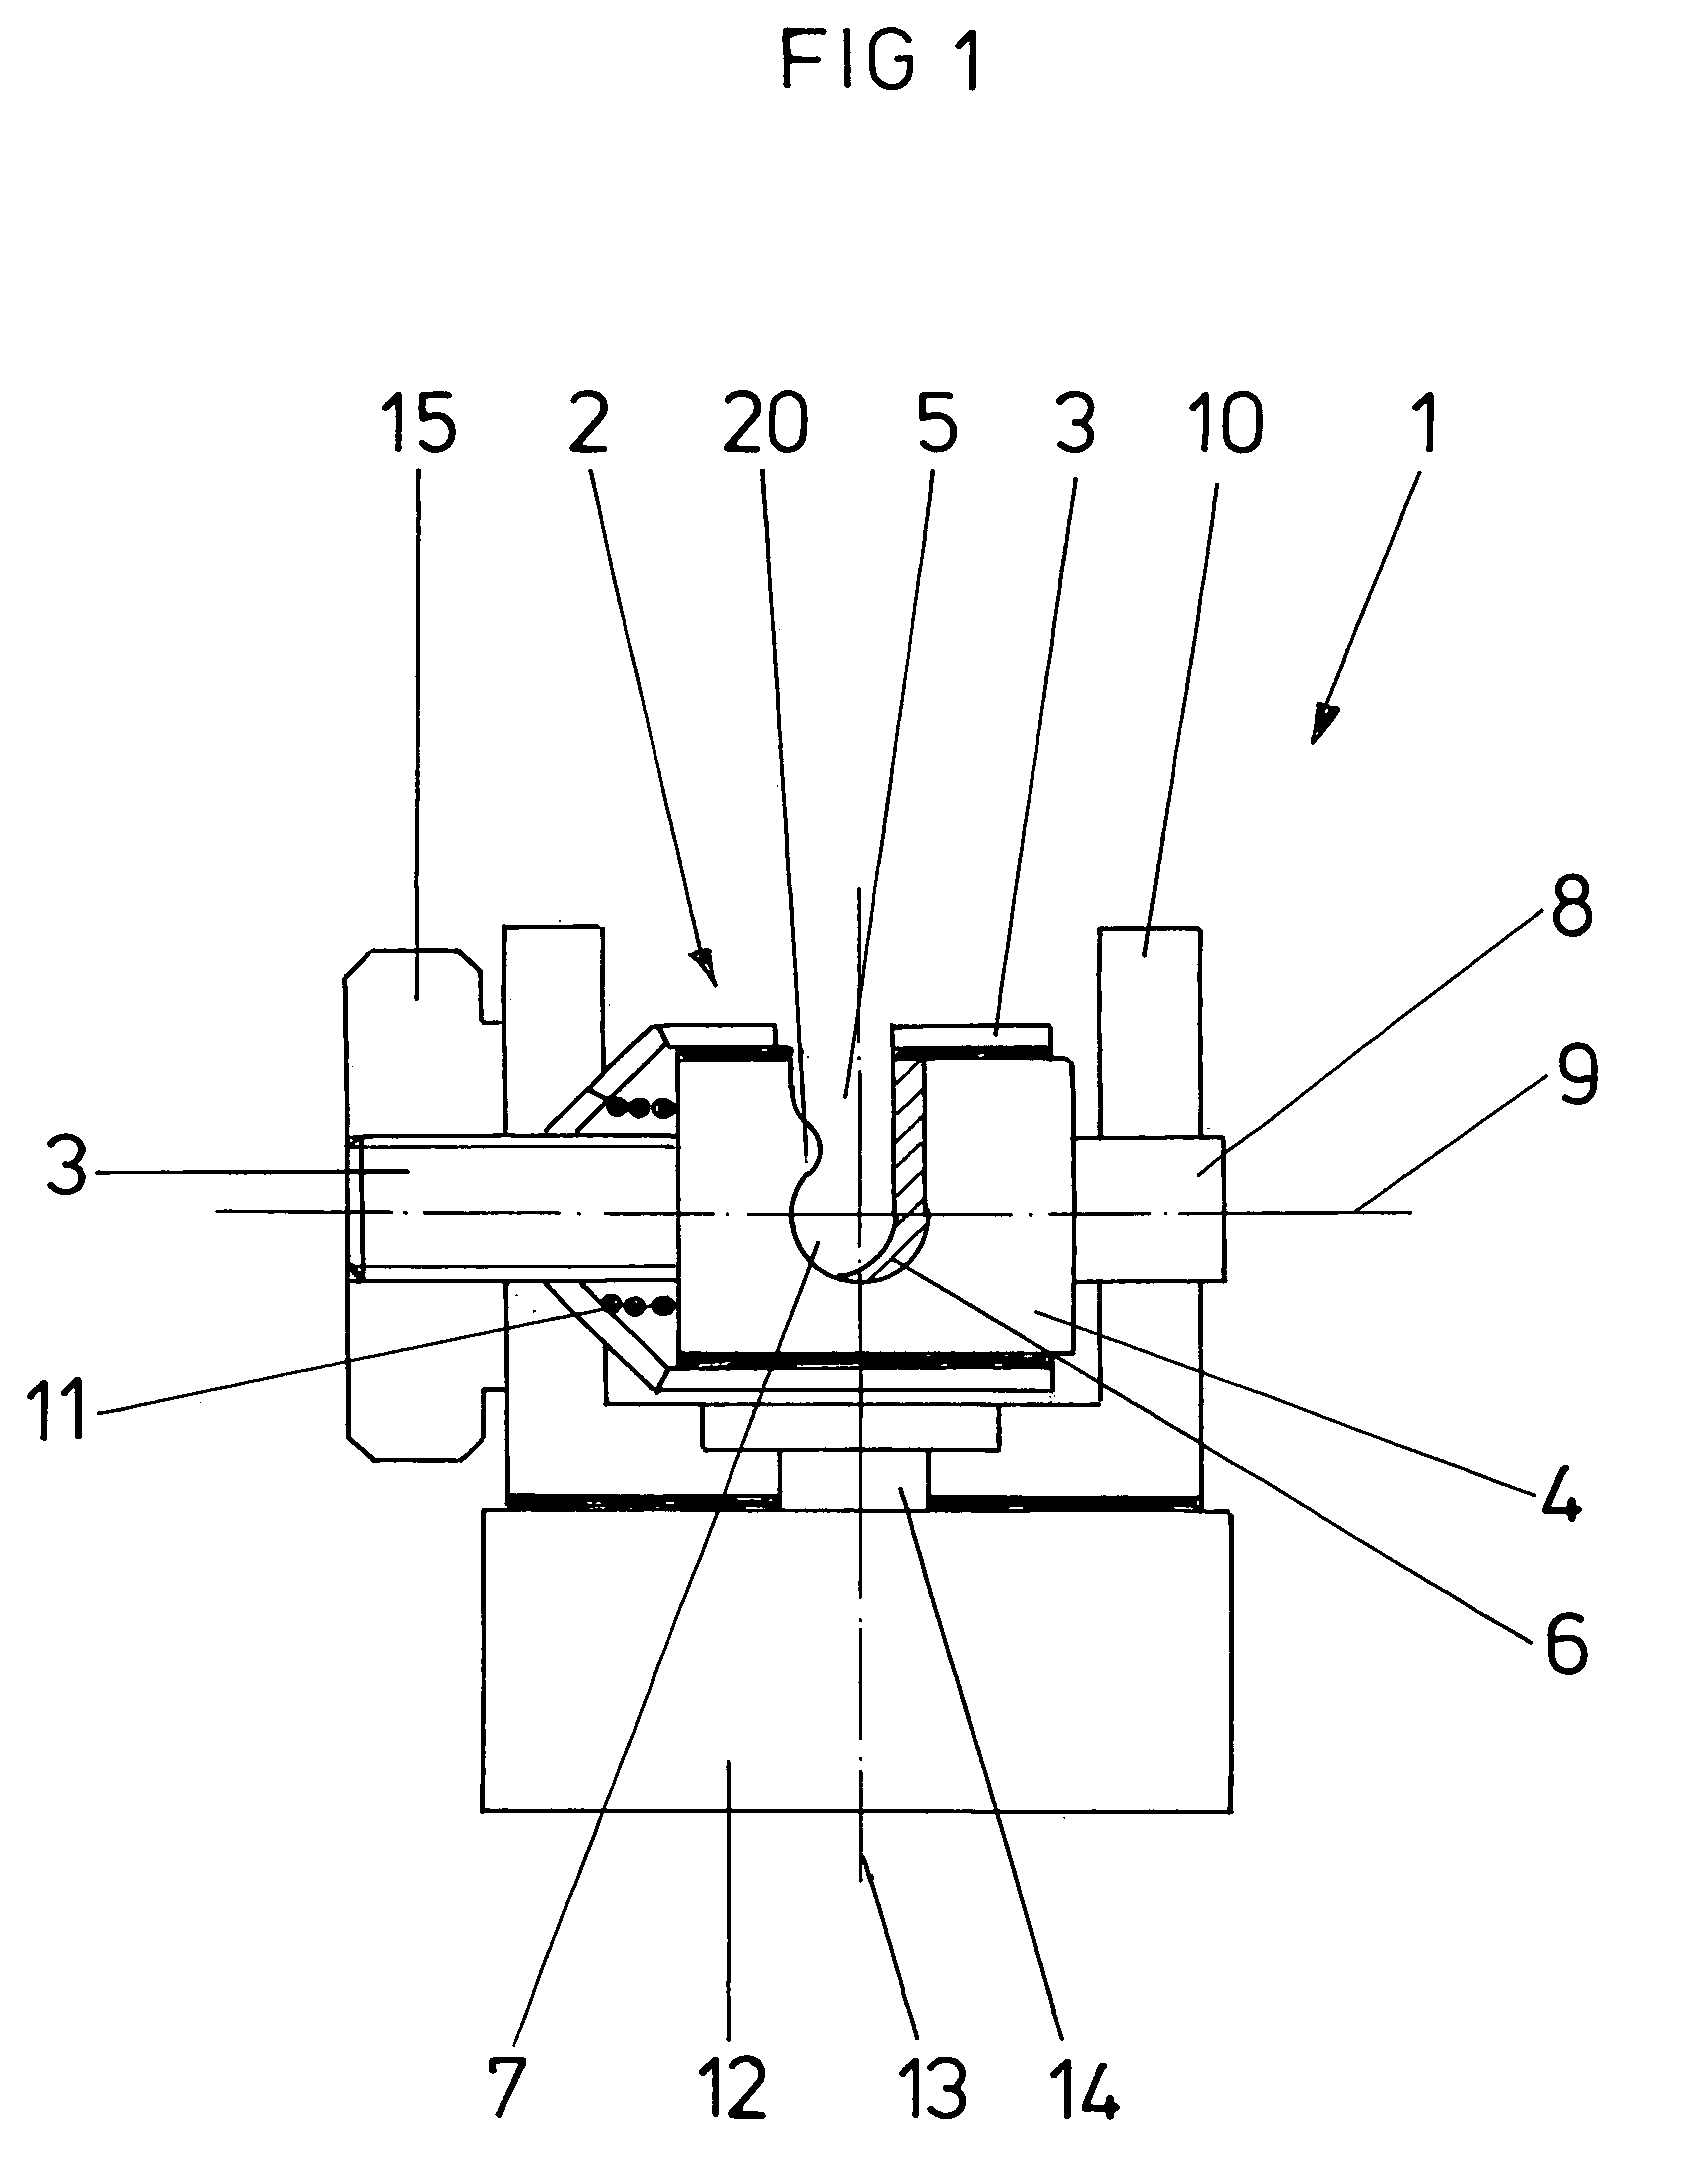 Device for retracting tissue